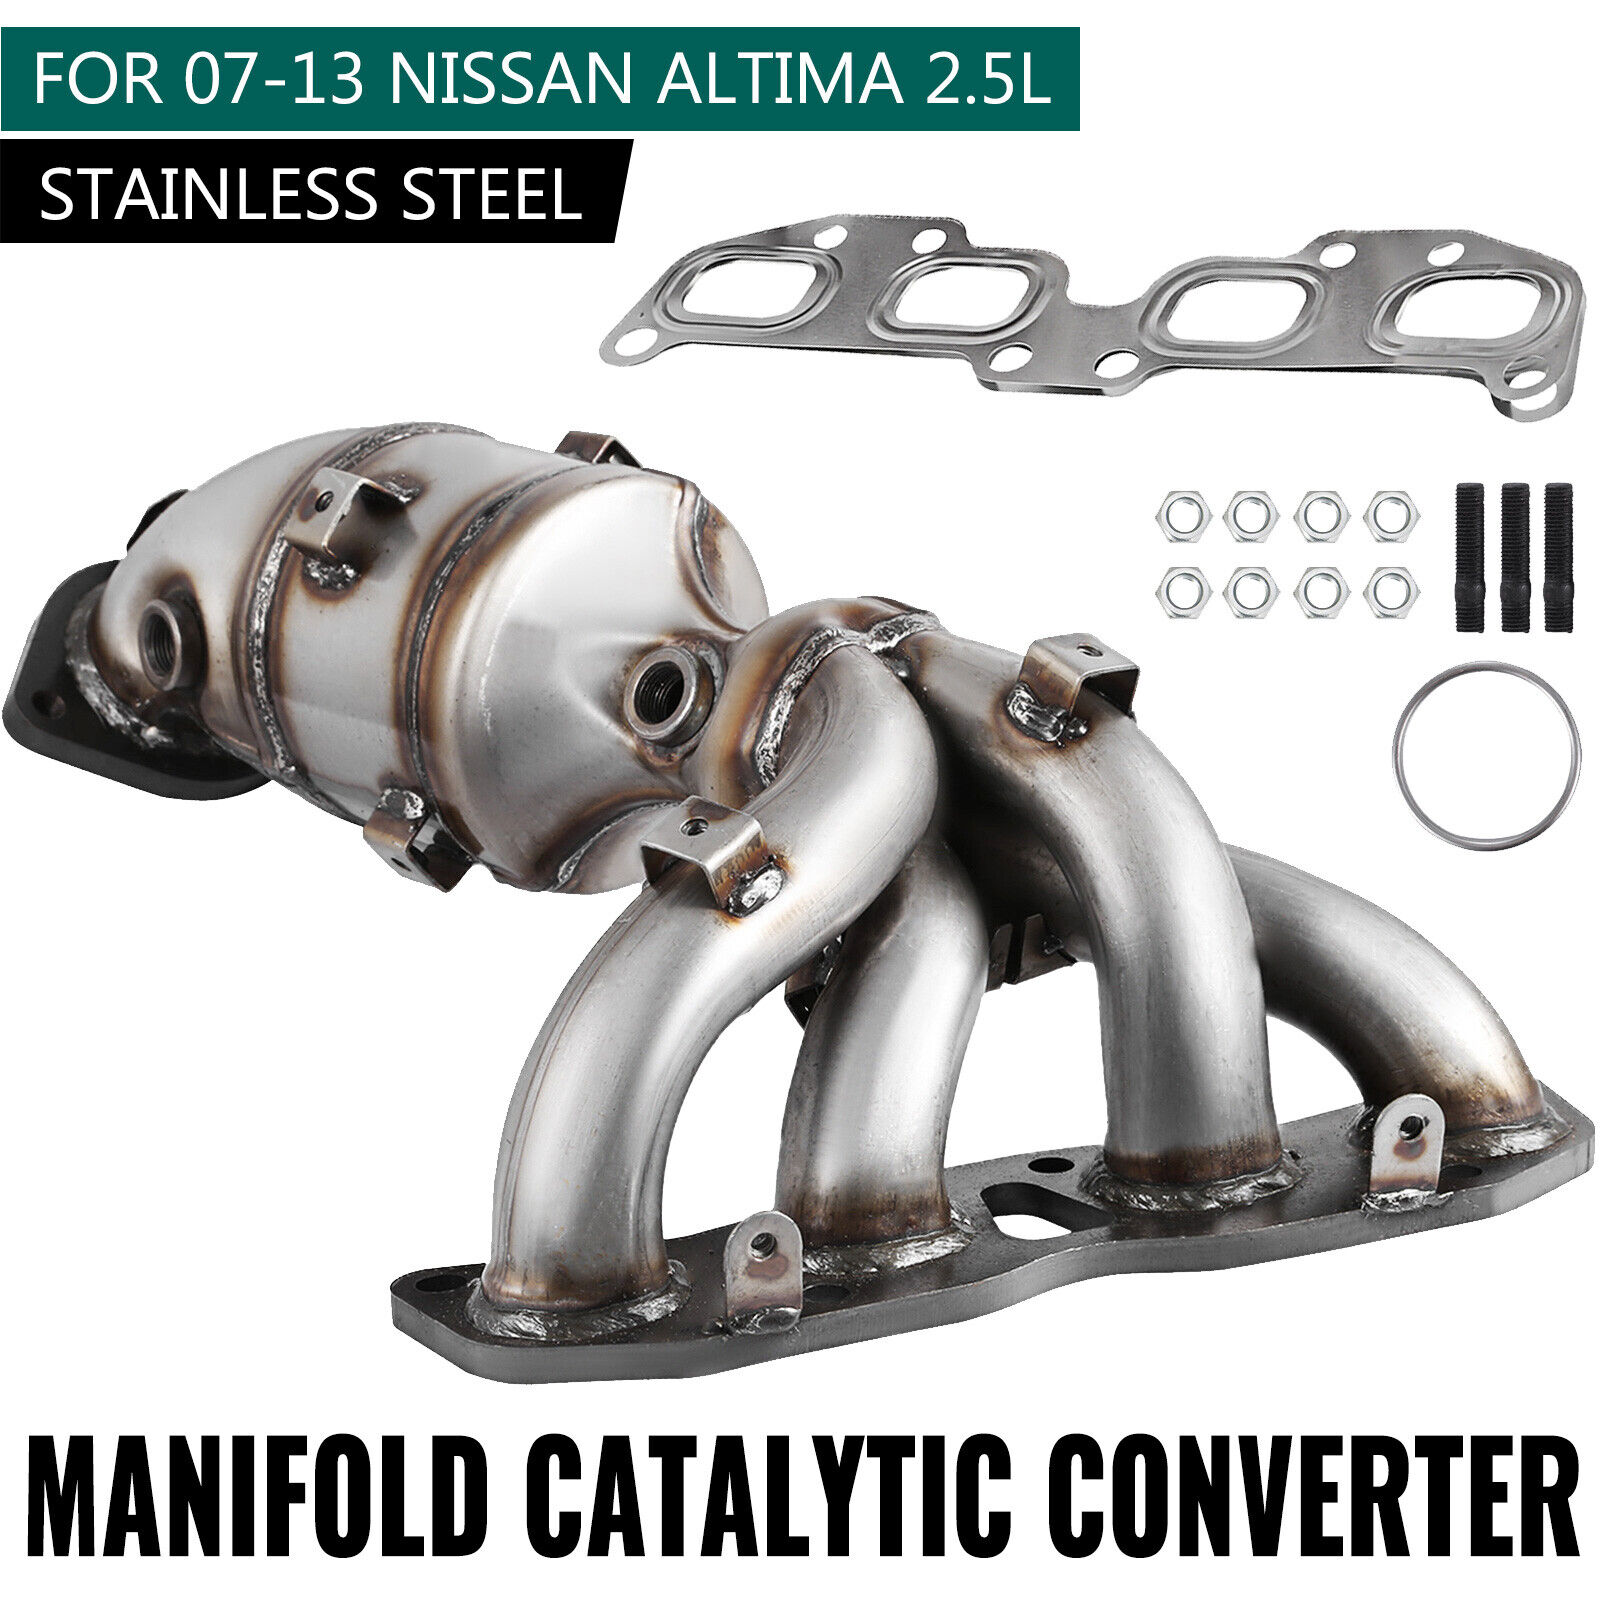 EPA Exhaust Manifold Catalytic Converter For 2007-2012 2013 Nissan Altima 2.5L